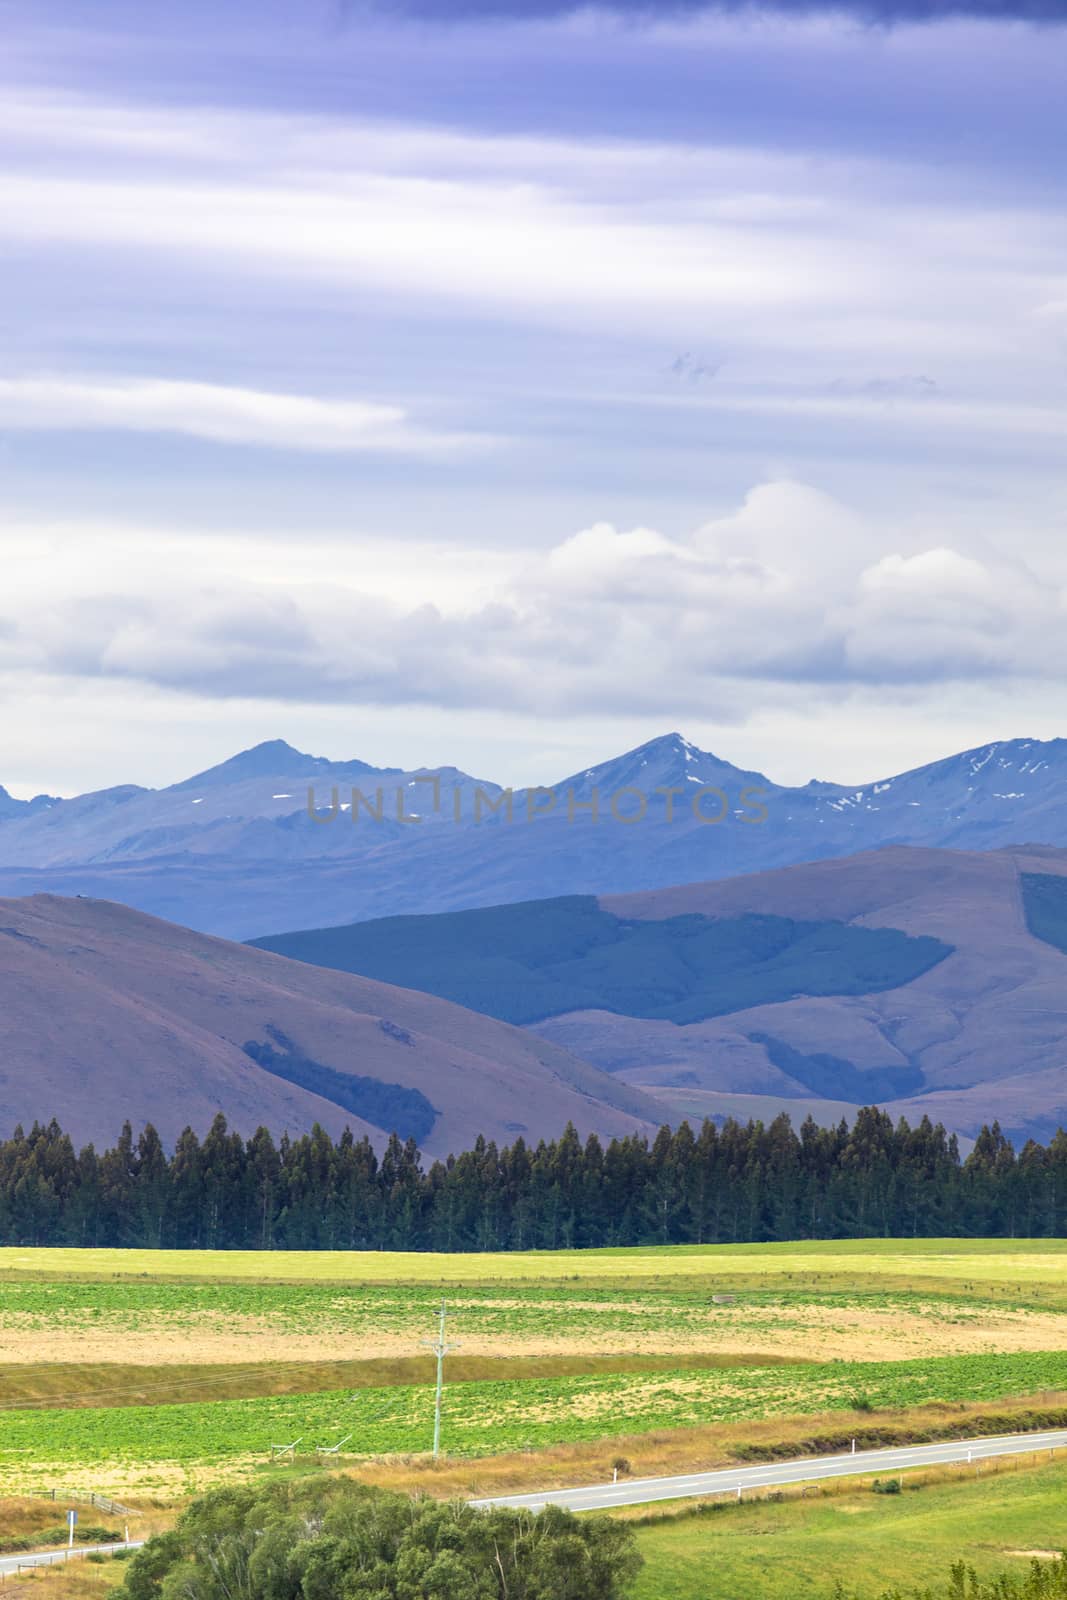 An image of a landscape scenery in south New Zealand